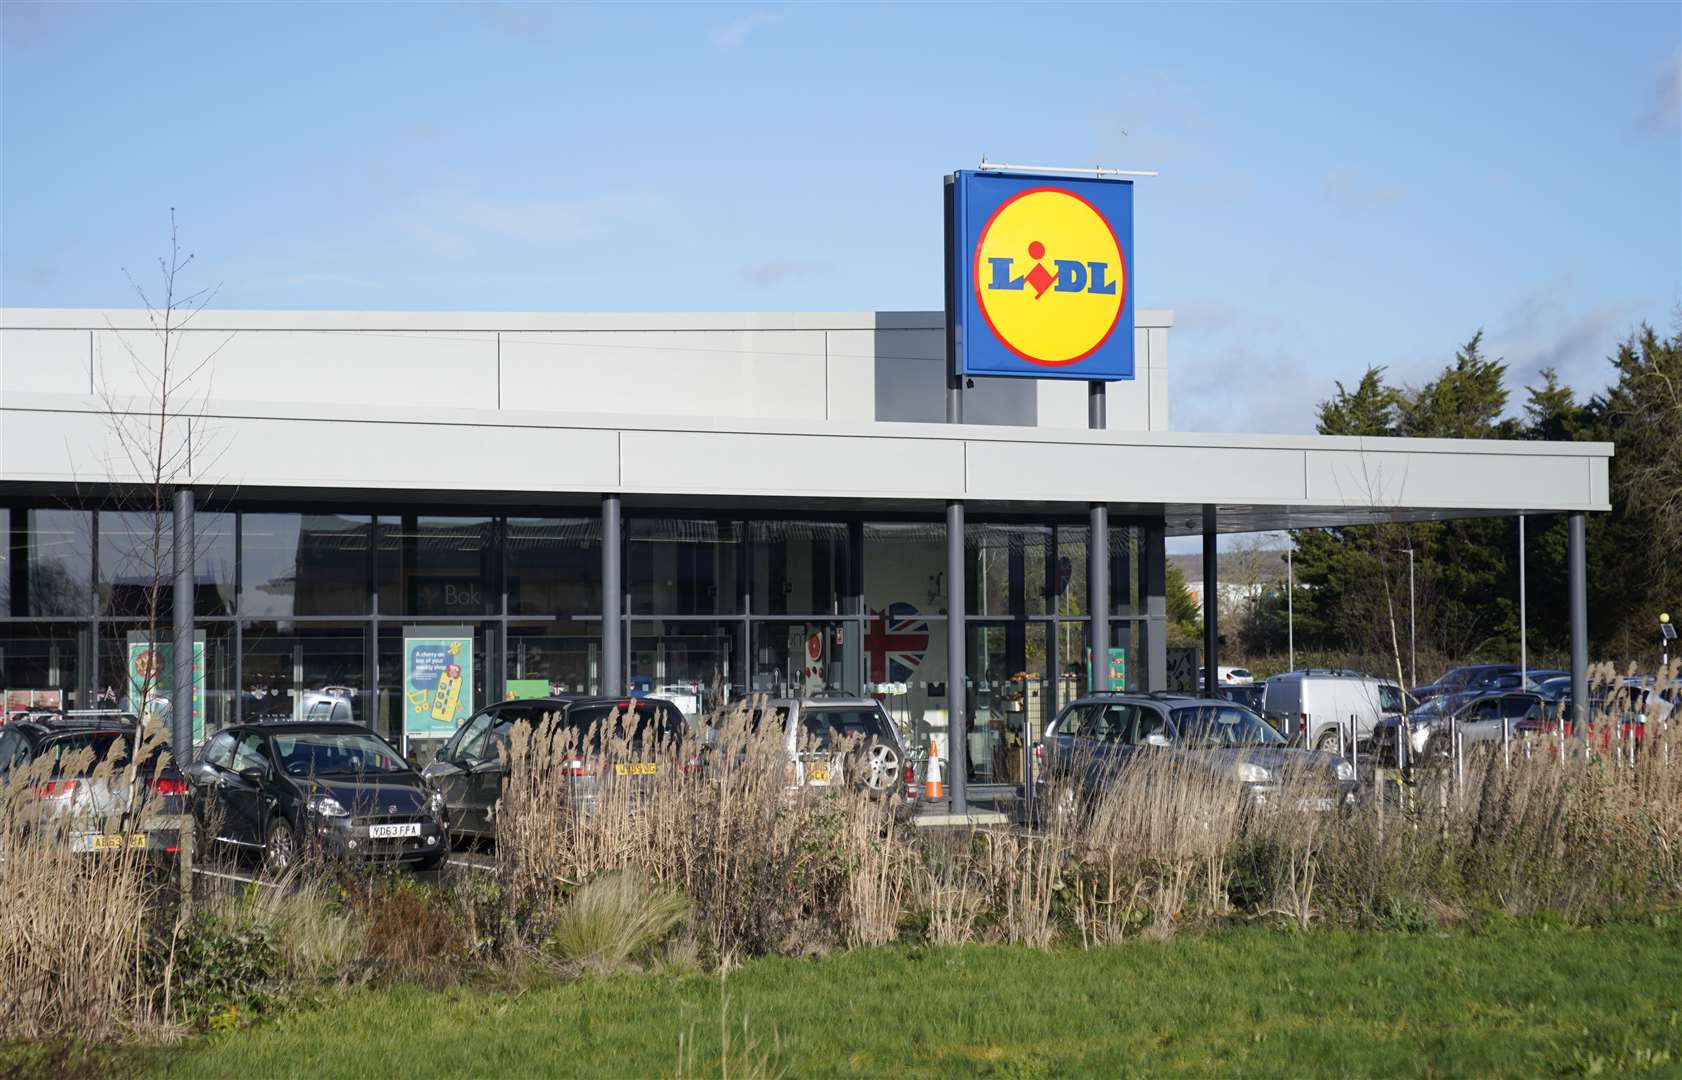 Bosses at Lidl also said they were responding to increased shoplifting (Andrew Matthews/PA)